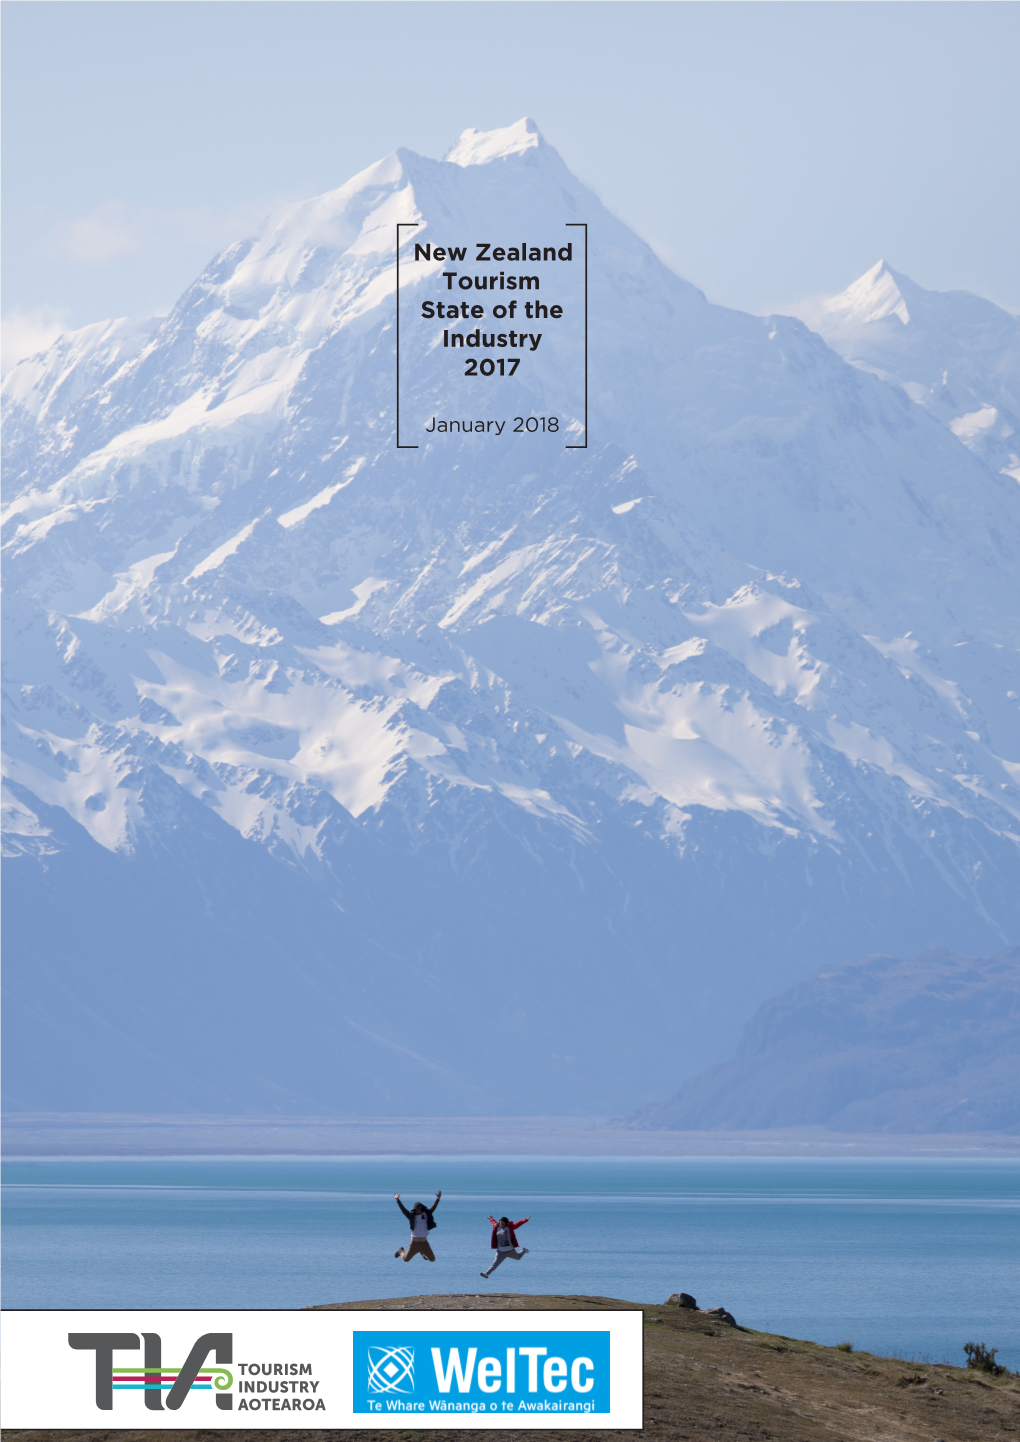 New Zealand Tourism State of the Industry 2017